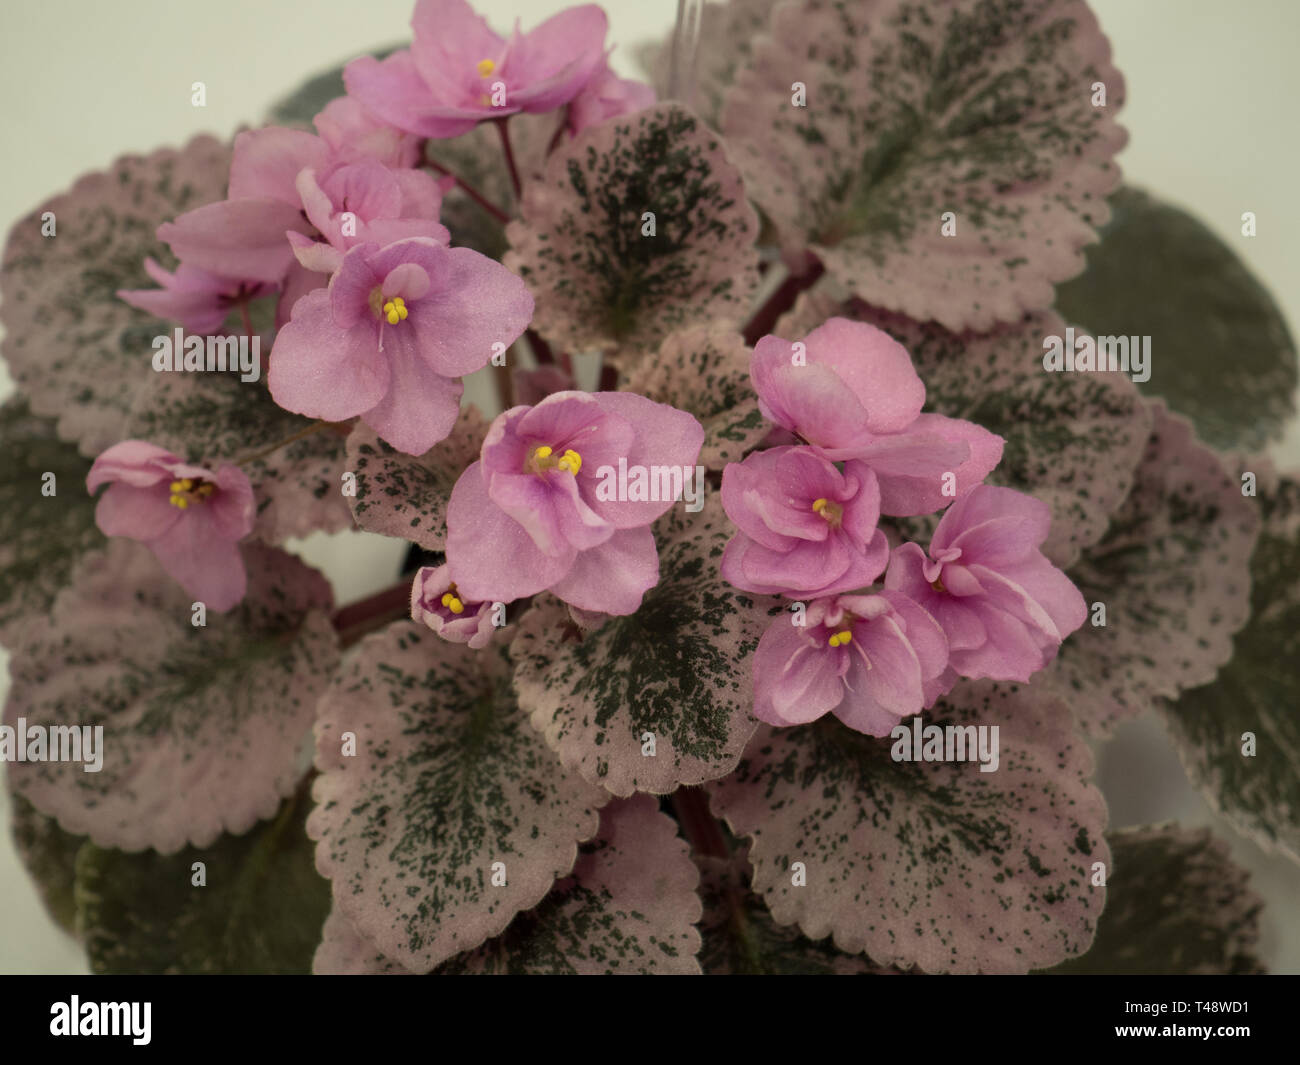 A closeup image of exotic African violets Stock Photo